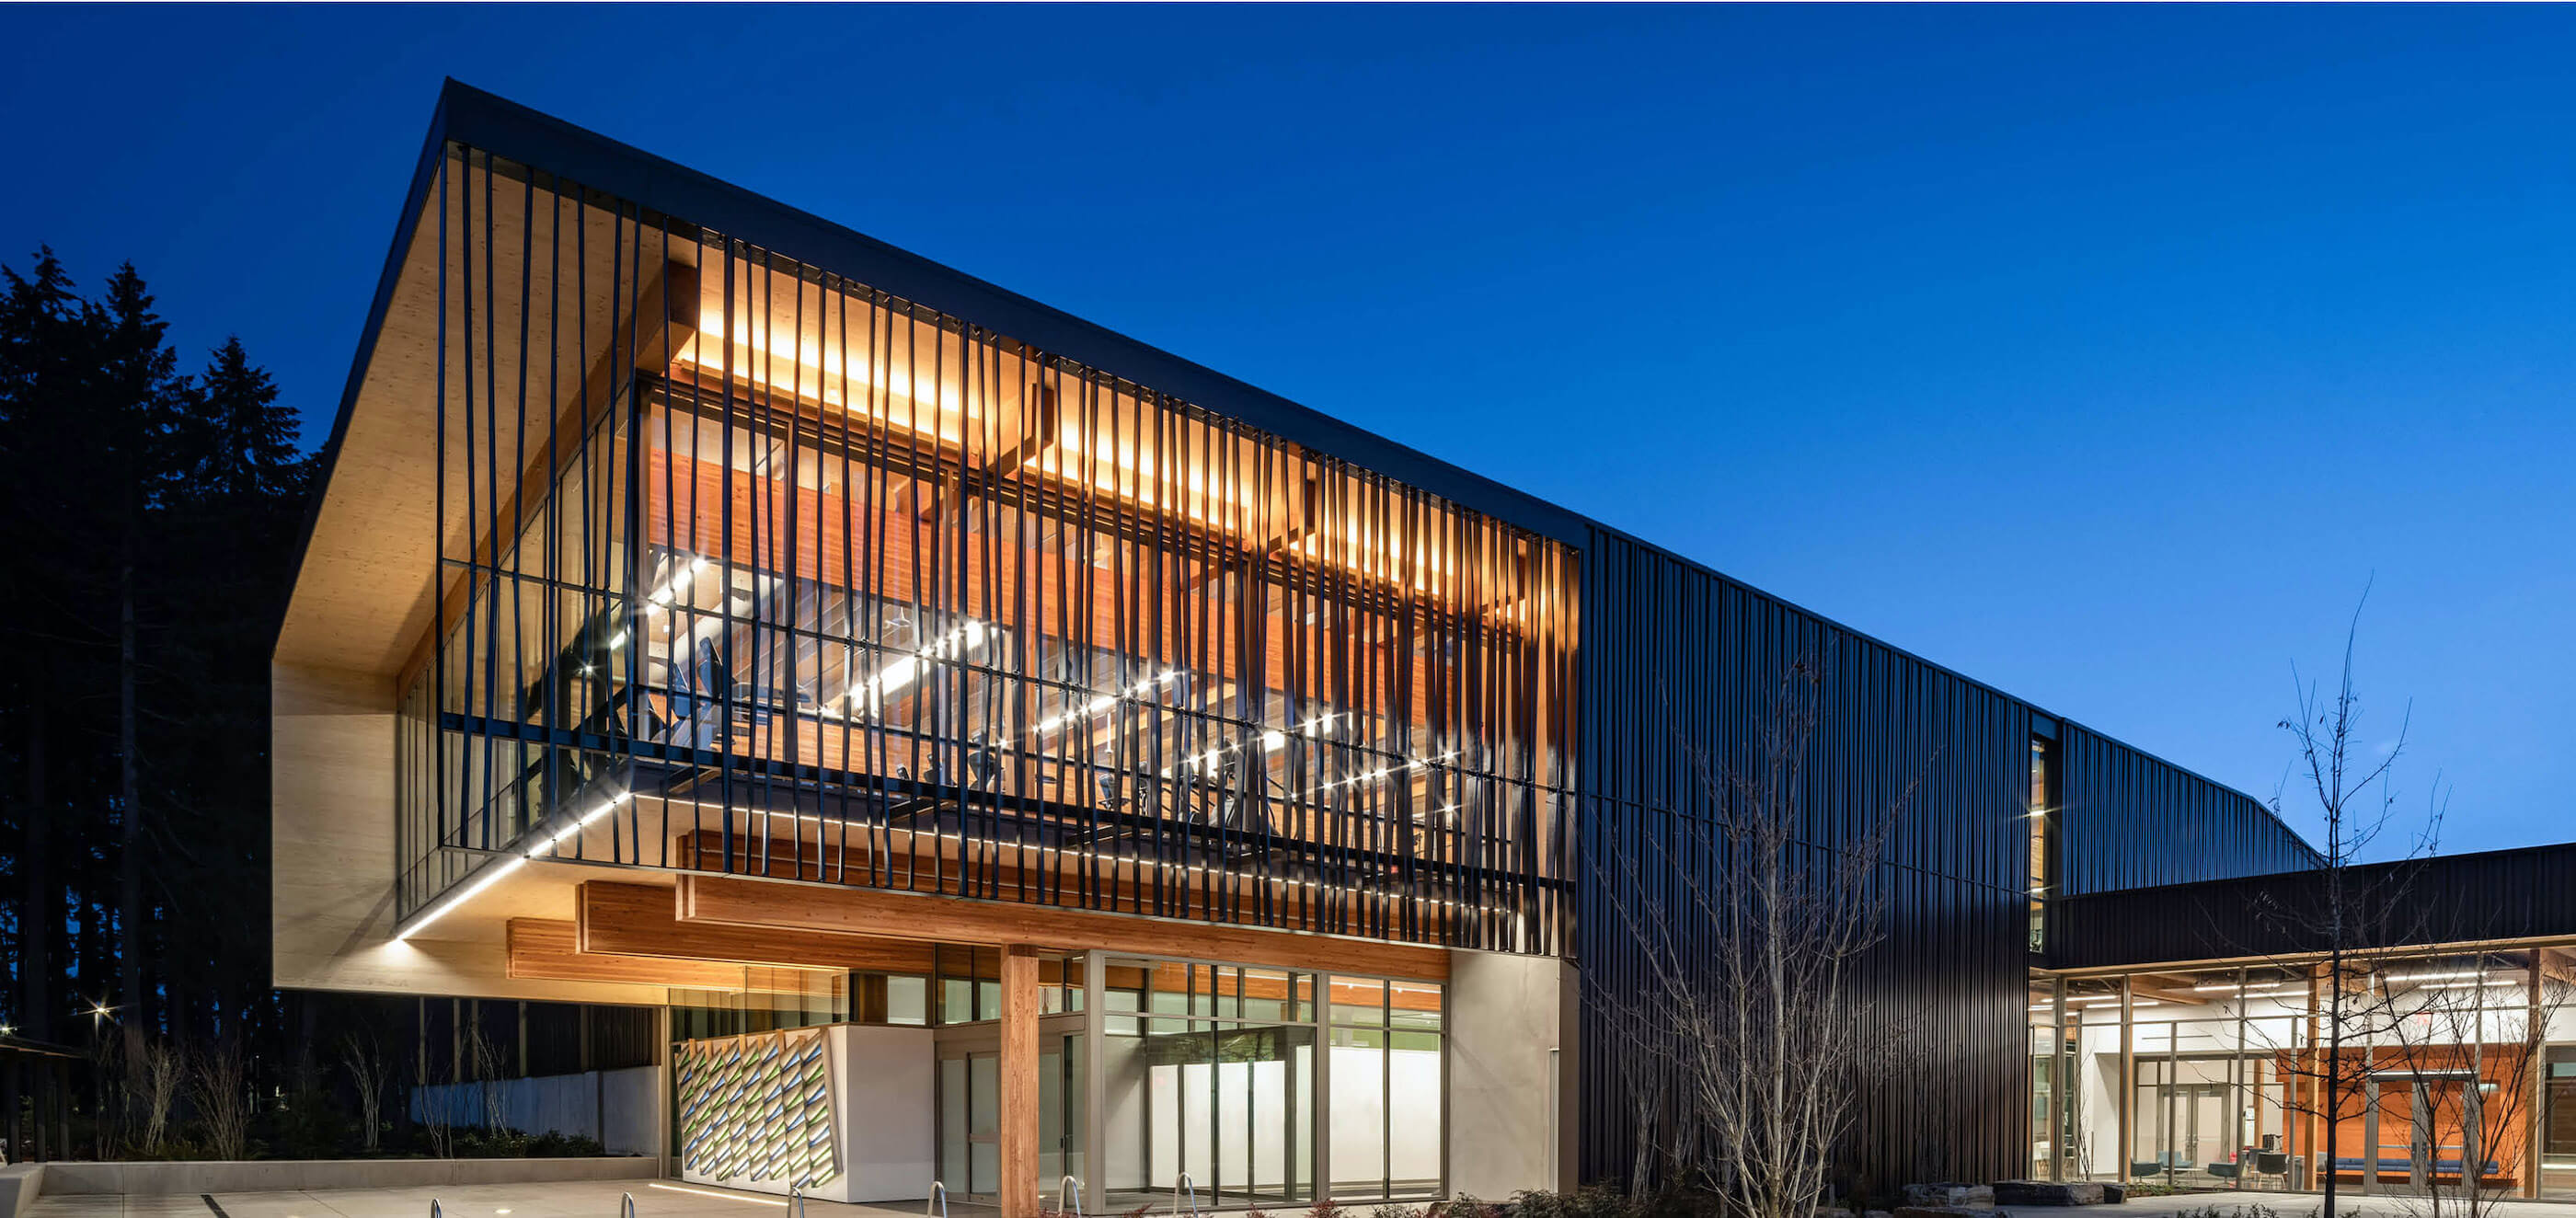 view of a cantilevered mass timber building at night